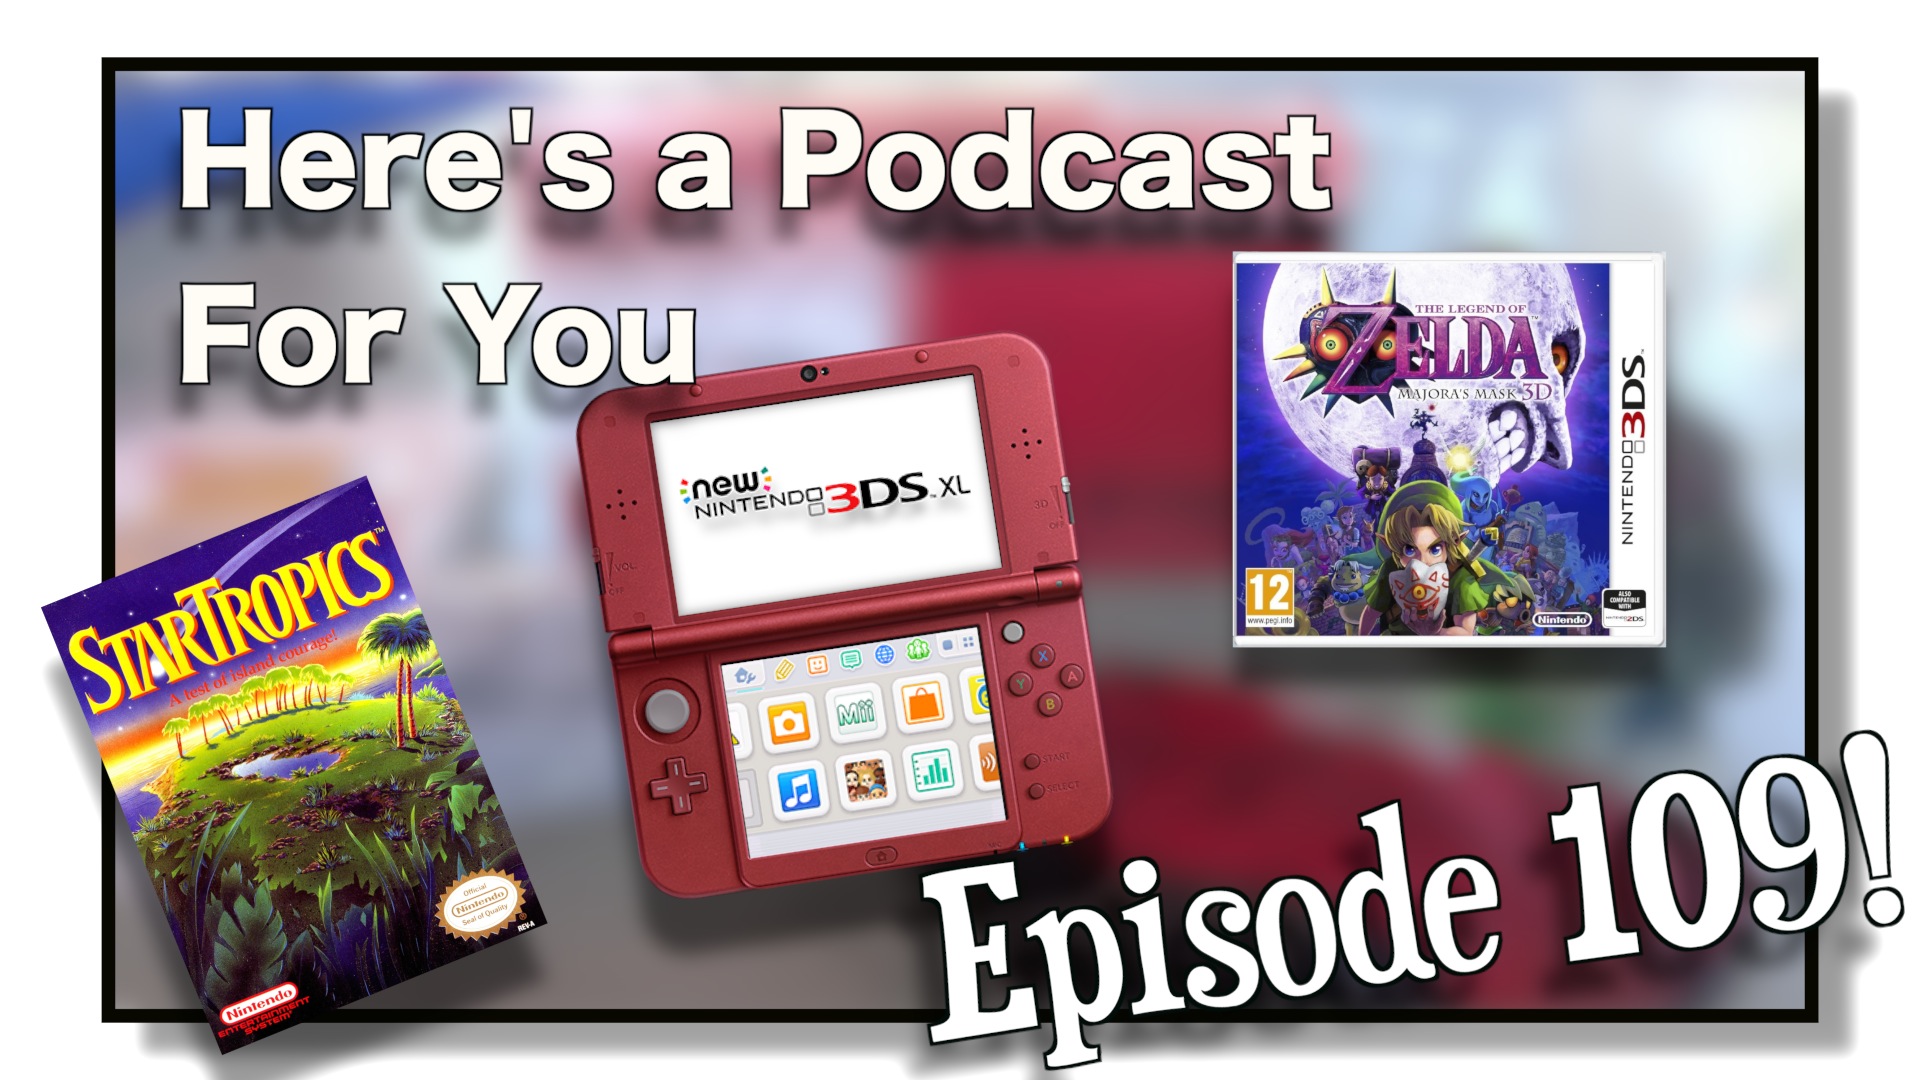 New Nintendo 3DS Archives - Nintendo Everything